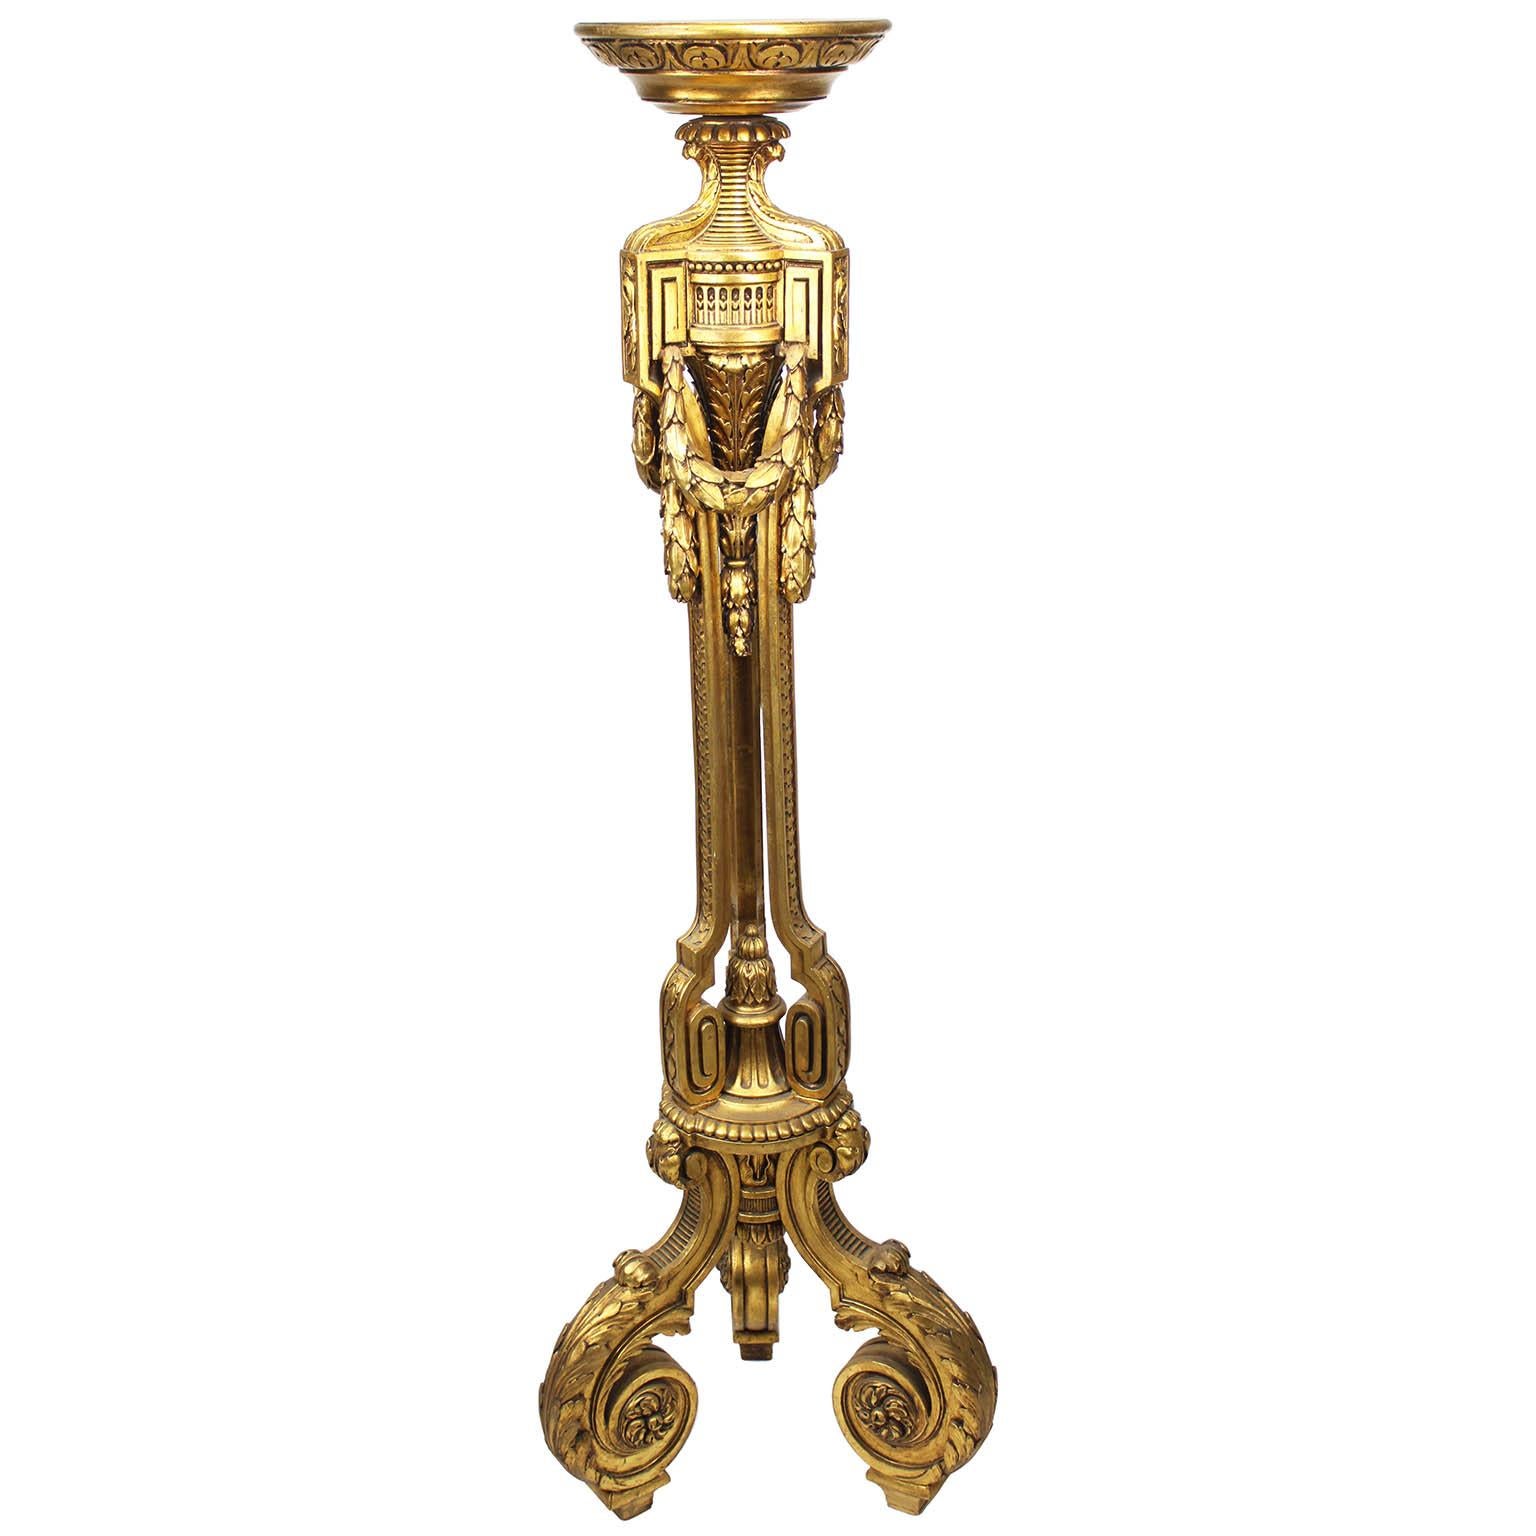 A Pair of French Belle Epoque Louis XVI Style Giltwood Carved Torchere (Torchière) Pedestal Stands. The slender tripod body, surmounted with laurel wreaths, rosettes and scrolls, with a circular and scrolled feet. Circa: Paris, 1900-1920.

Height: